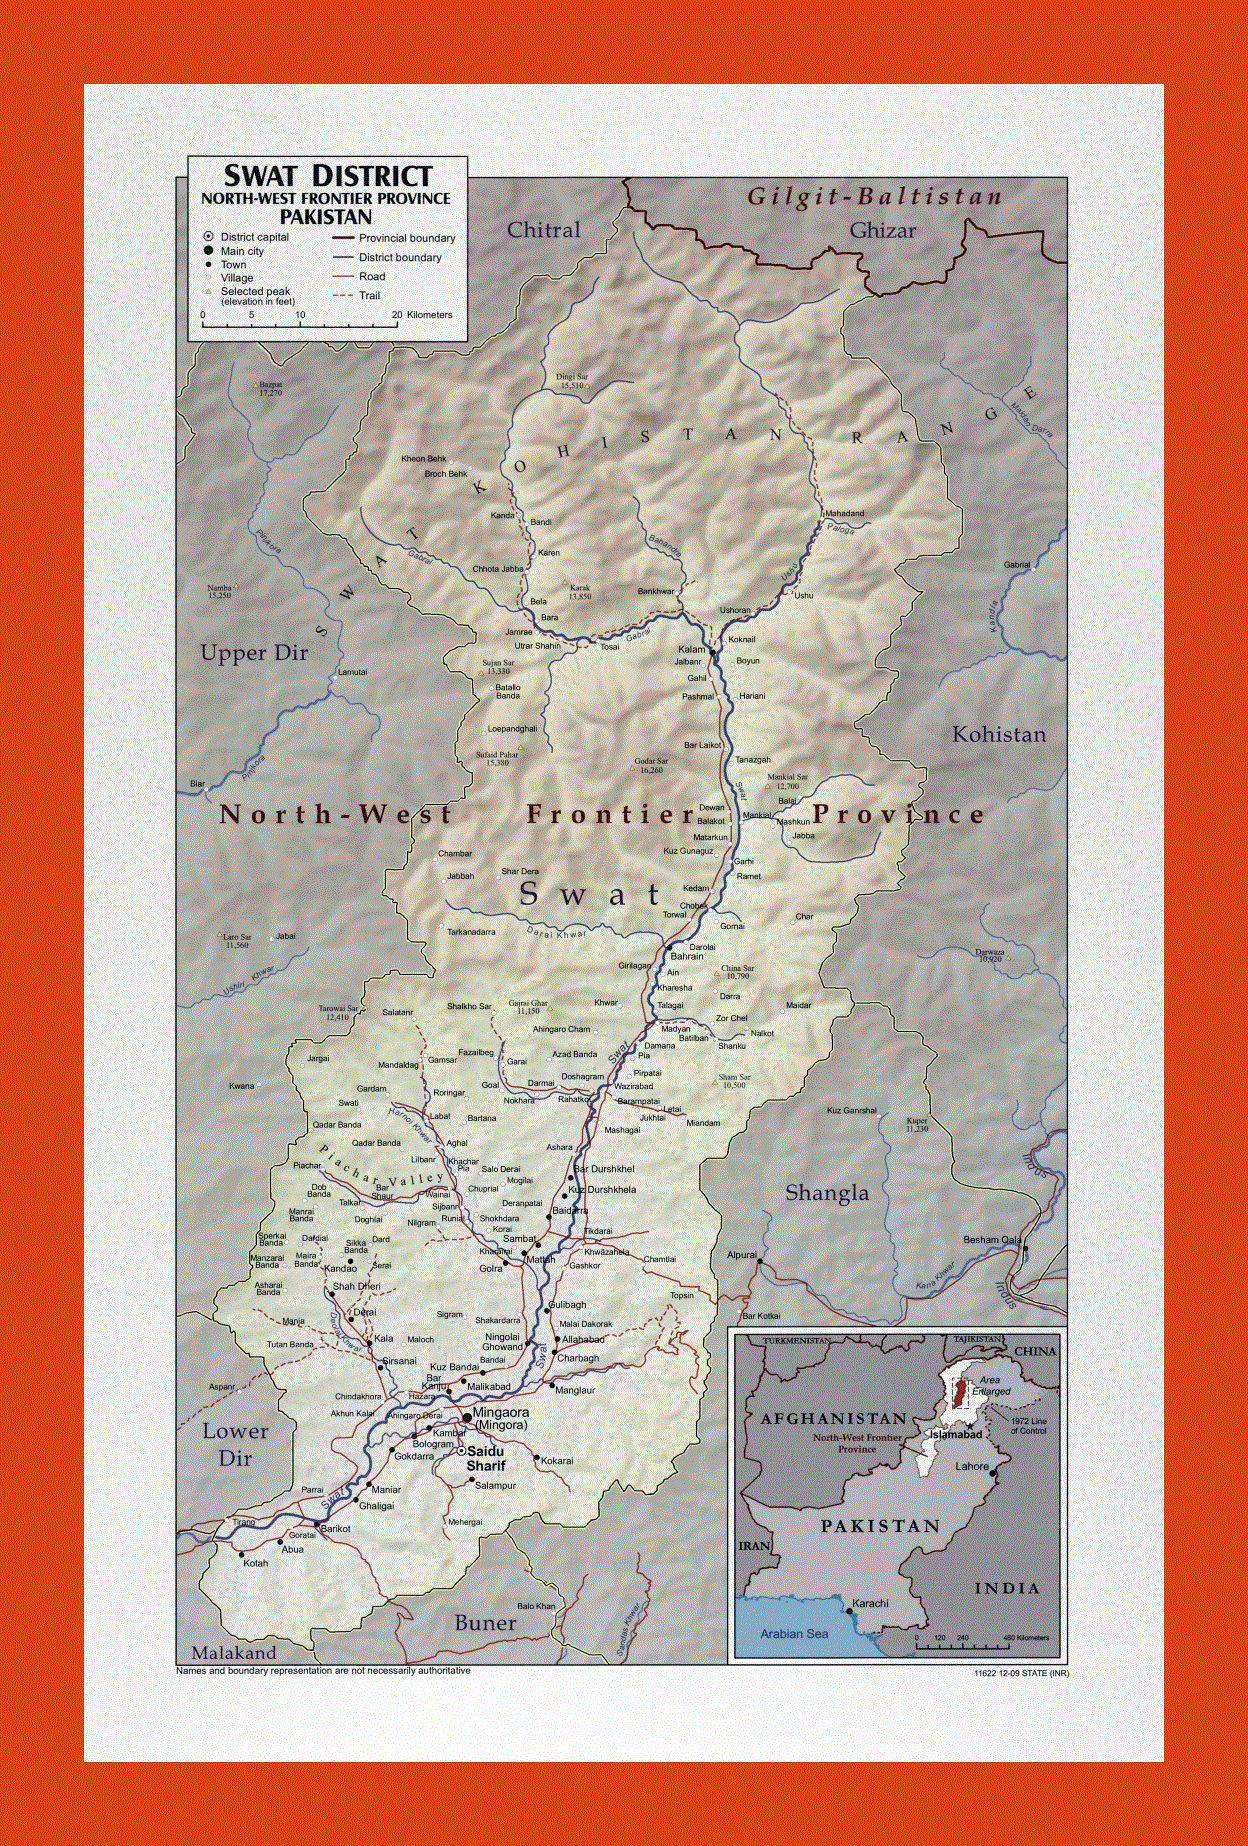 Swat District North West Frontier Province map of Pakistan - 2009